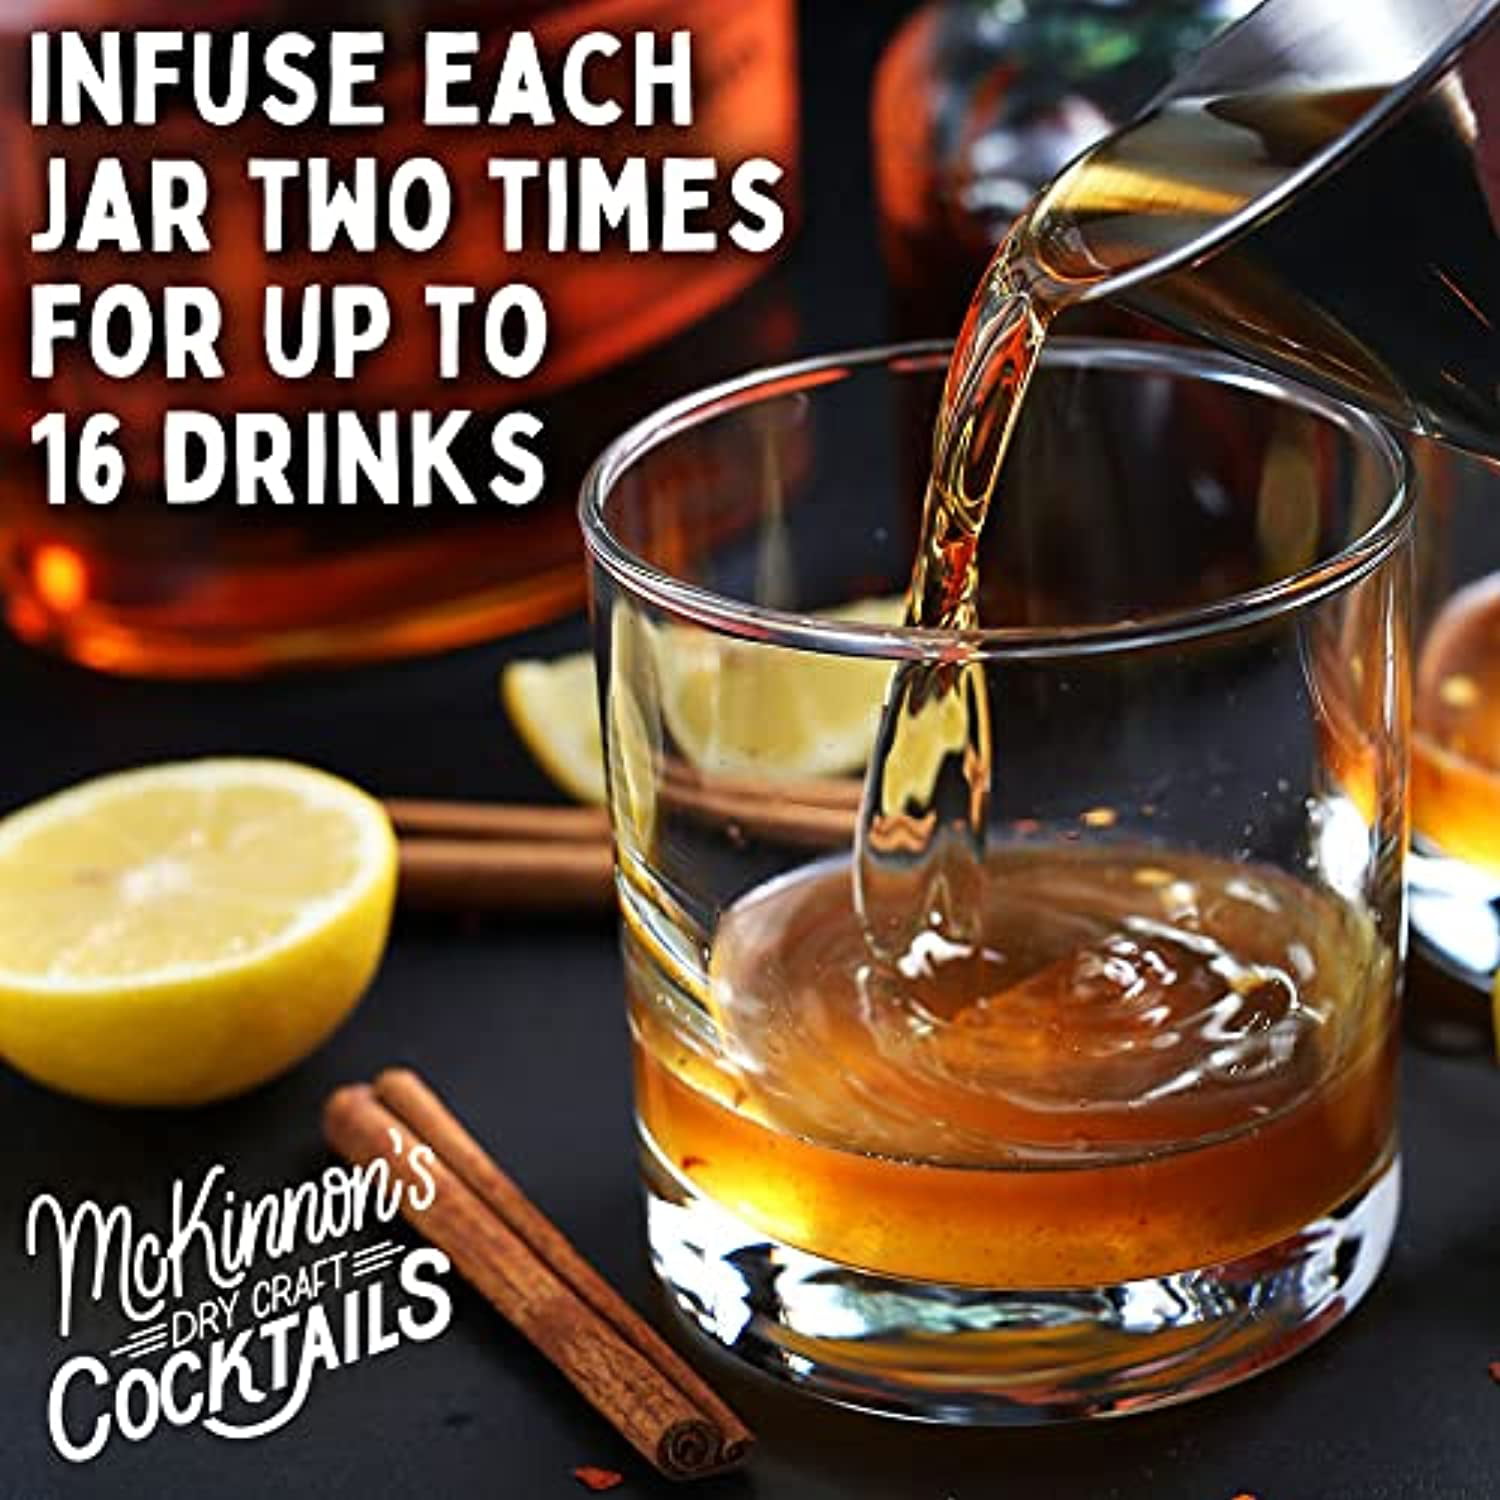 Mckinnon'S Dry Craft Cocktails, Dehydrated Fruit And Herbs, Diy Mixology, Infusion Kit, Mason Jar Serves 8 – 16 Drinks